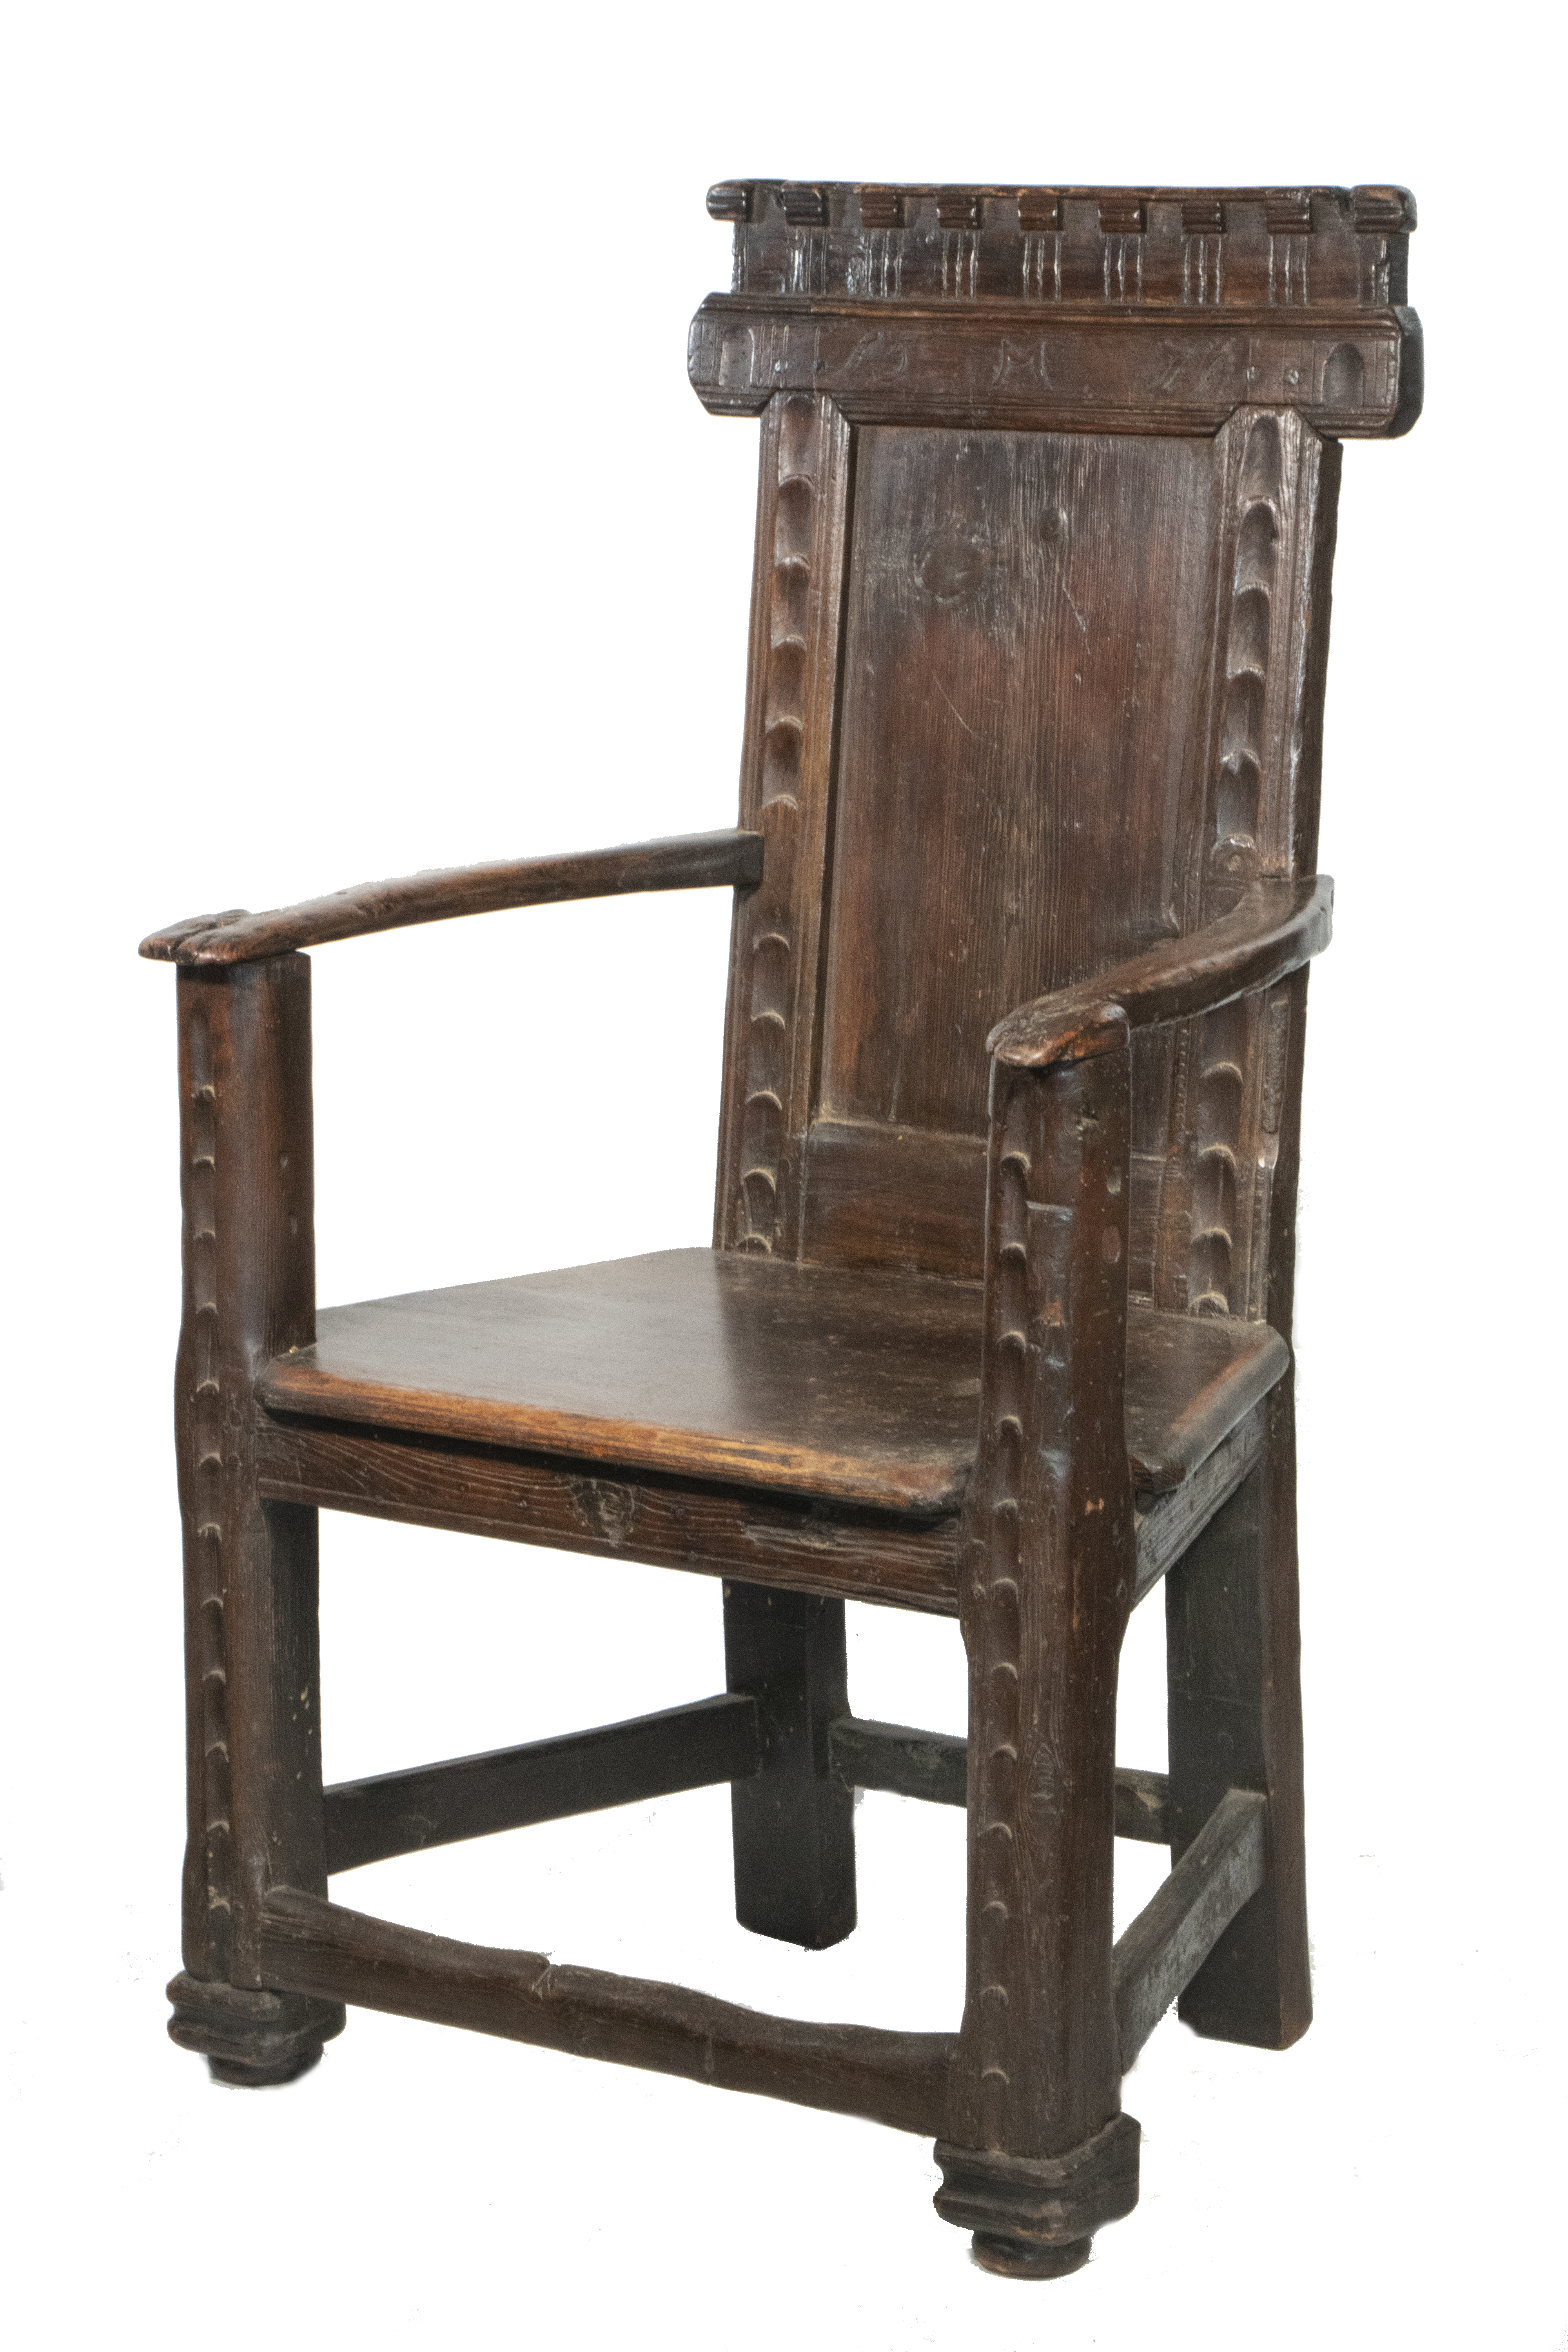 16TH C. ENGLISH OAK ARMCHAIR Carved